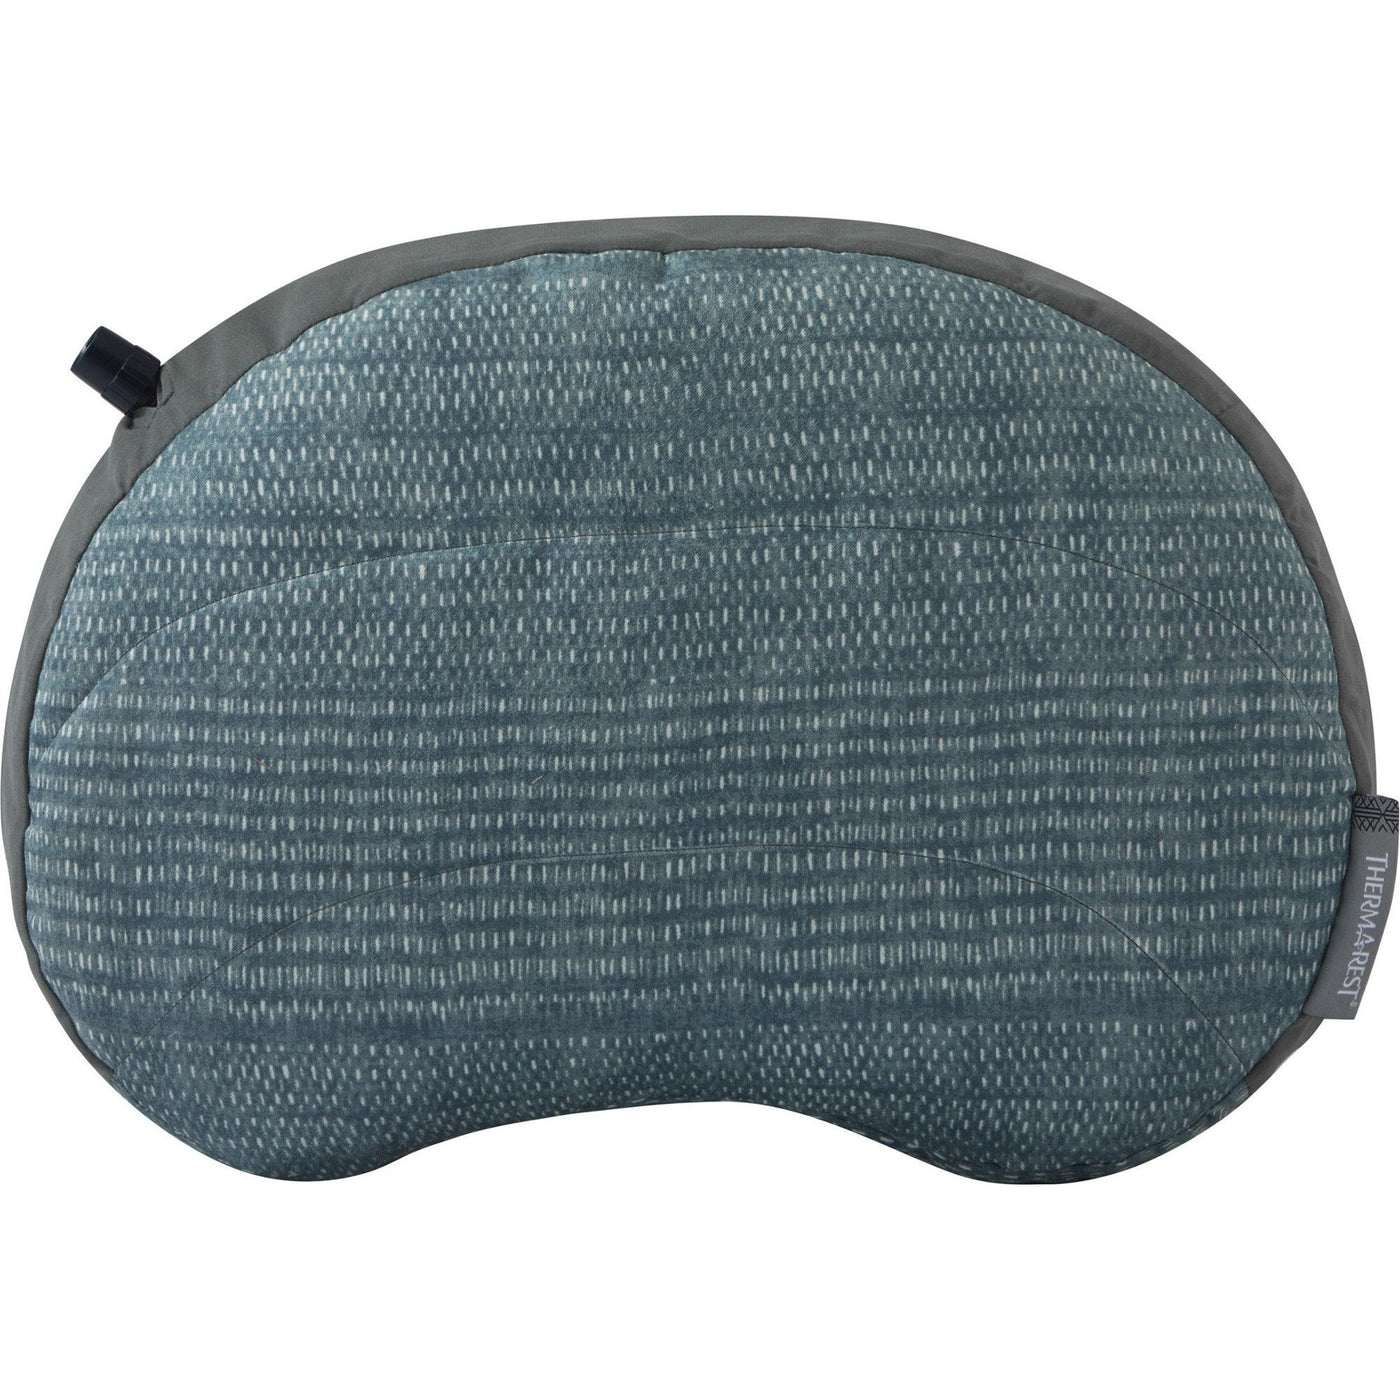 Thermarest Air Head Pillow